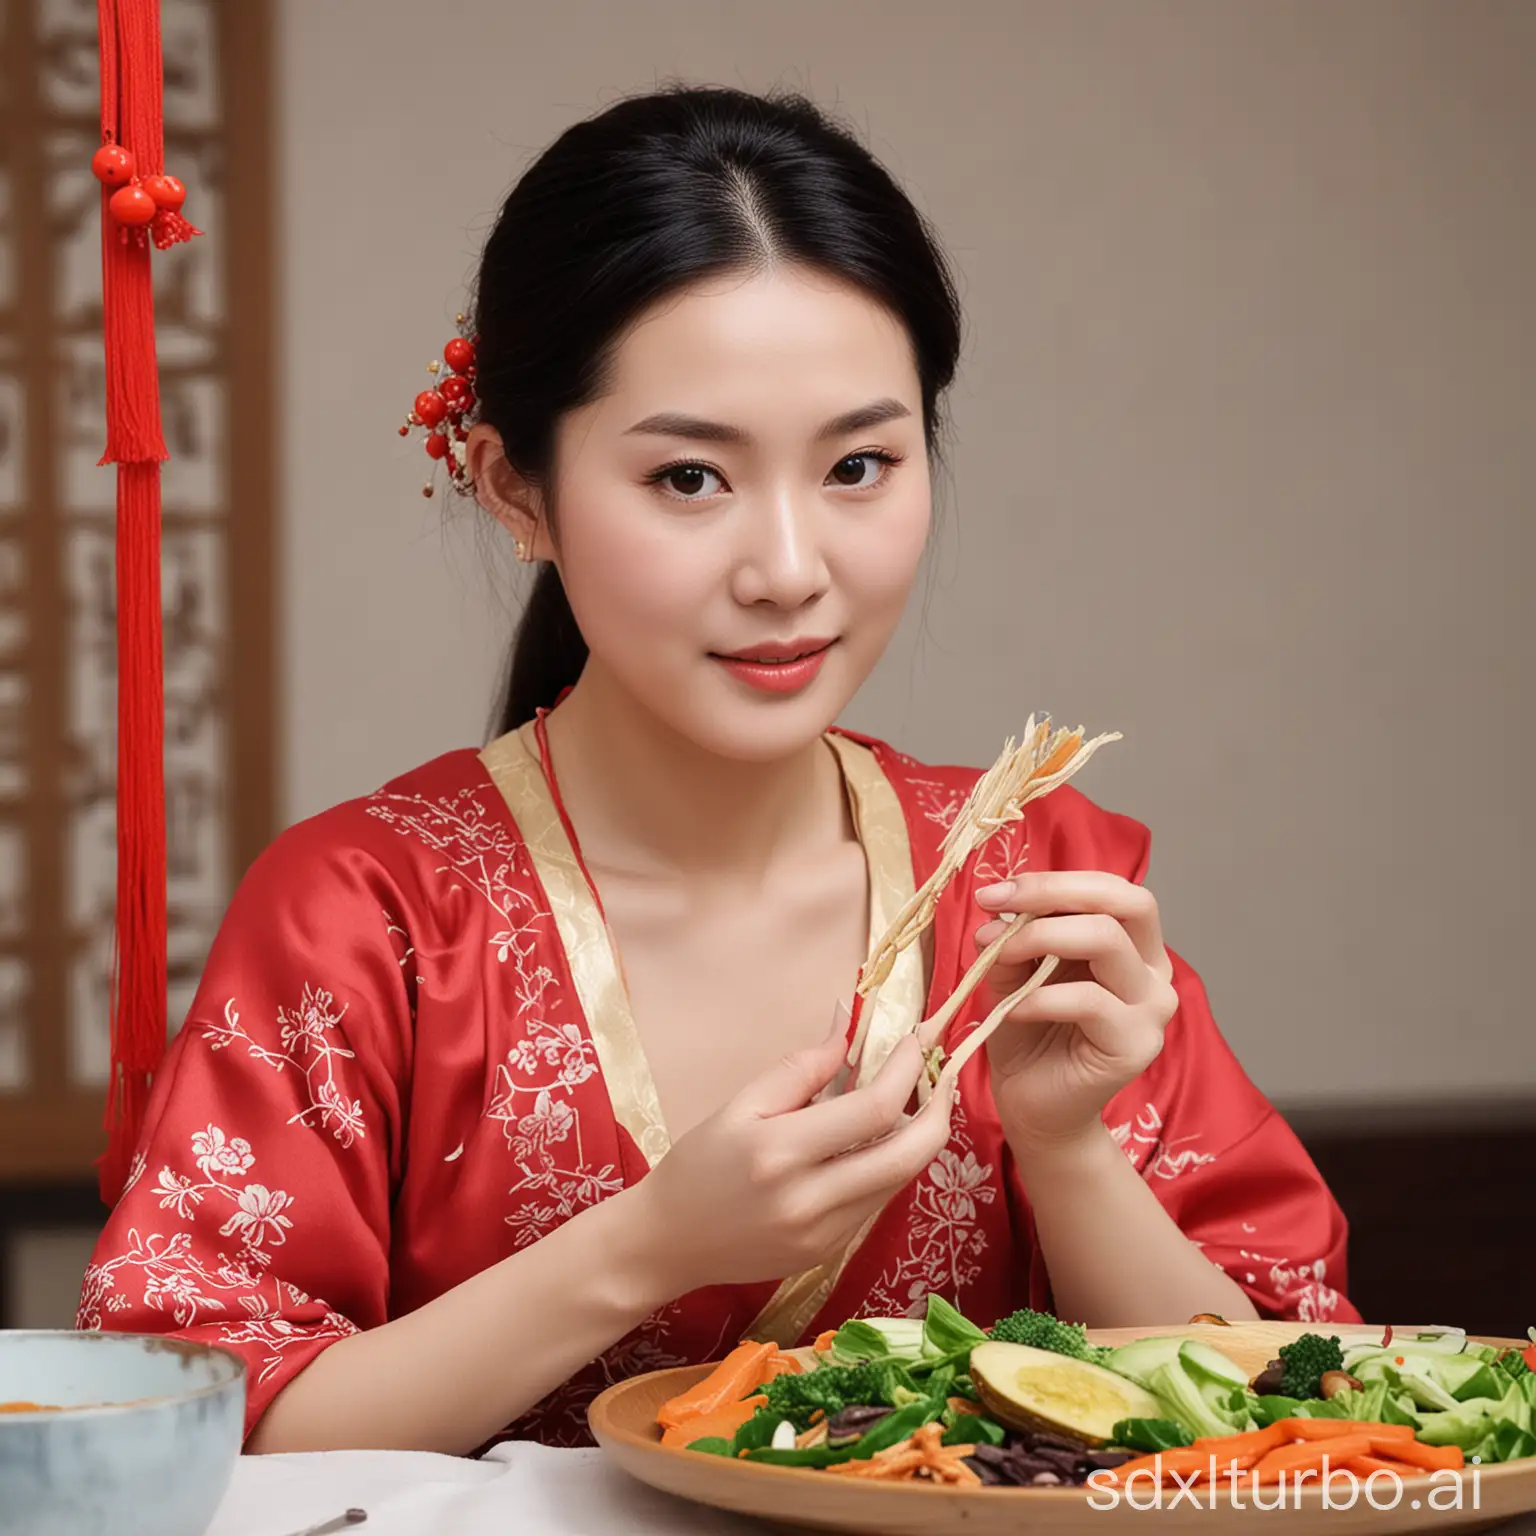 promoting healthy diet and beauty of Chinese women